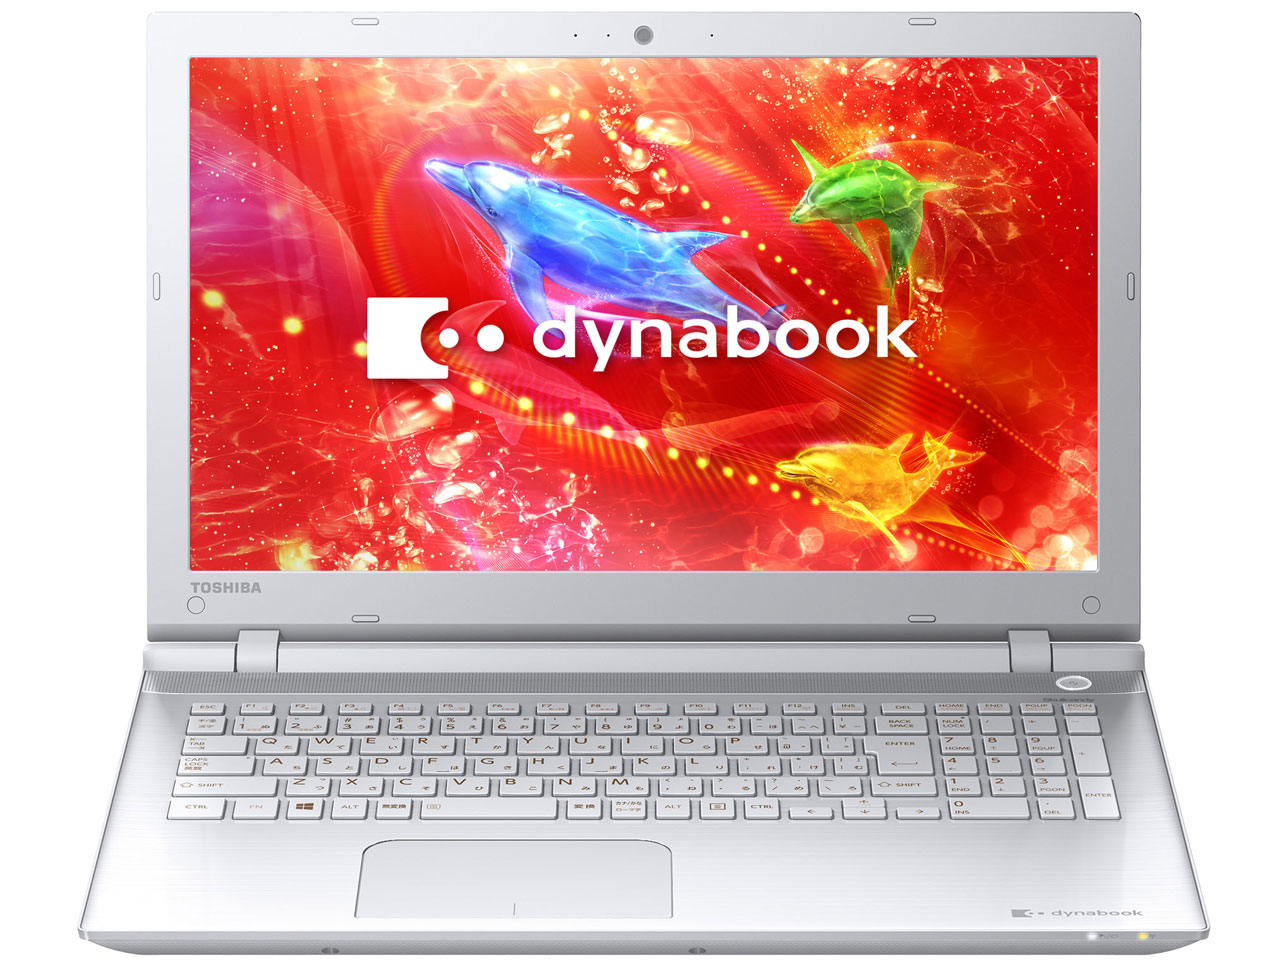 dynabook AB55/R ハイブリッドHDD/Office Home and Business Premium搭載モデル